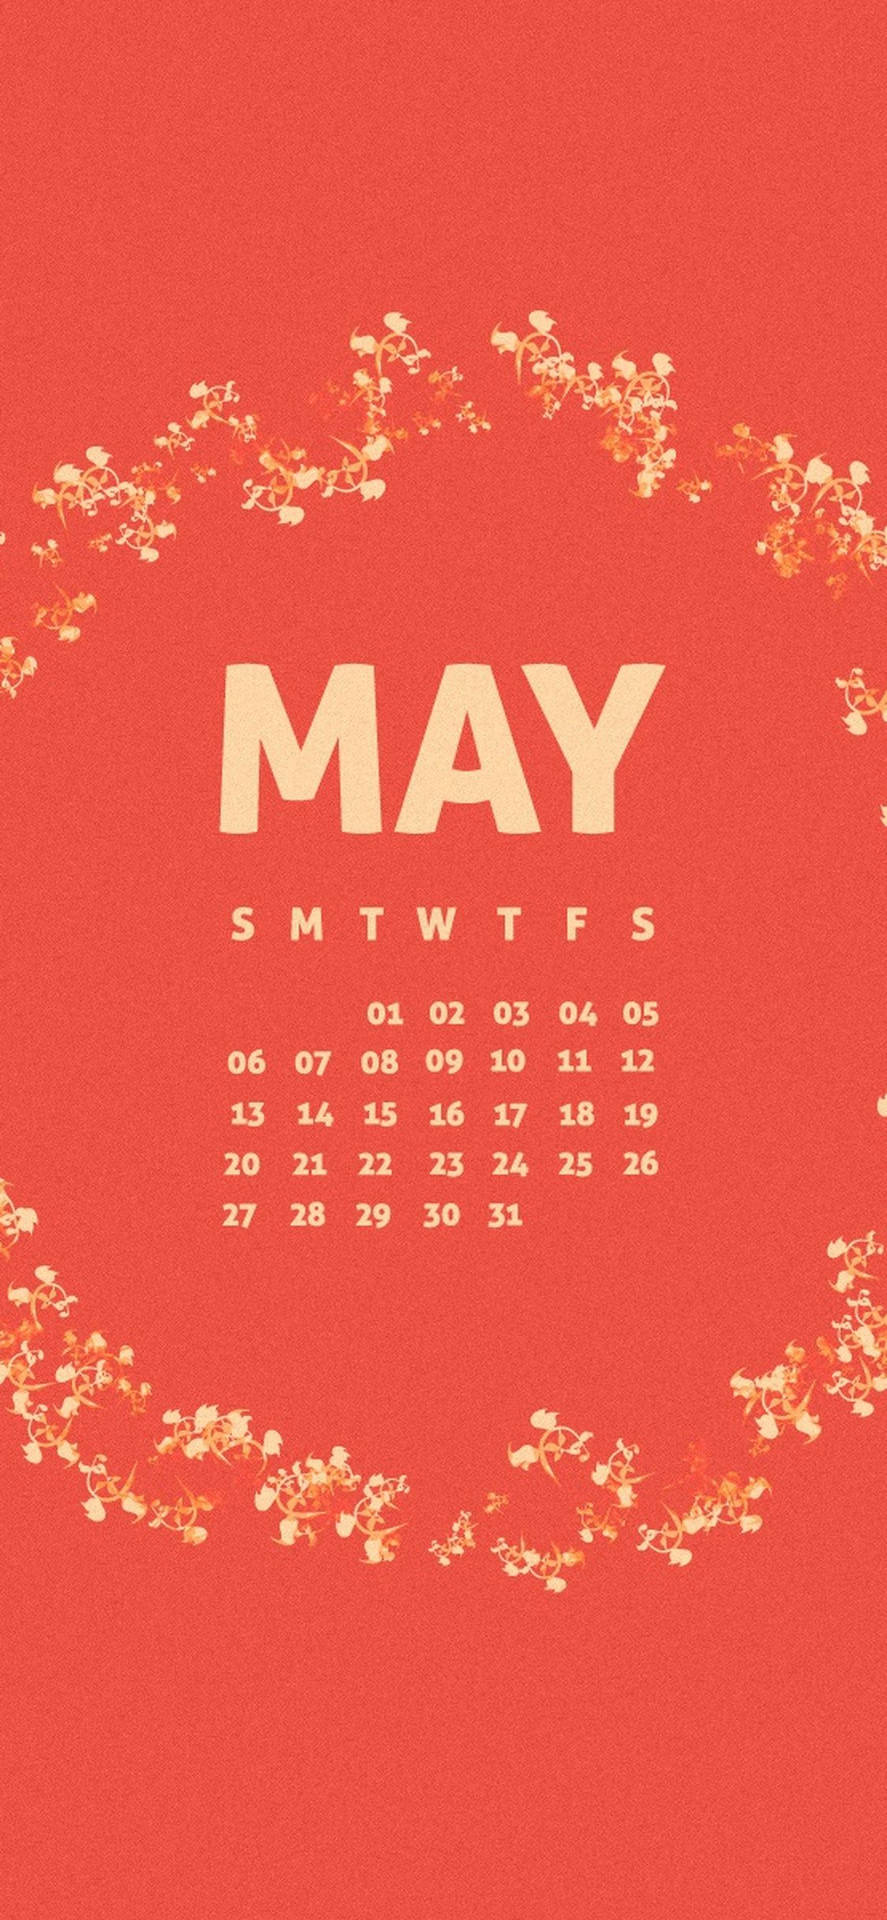 Celebrate The Beauty Of May With A Red Calendar Full Of Vibrant Flowers Background